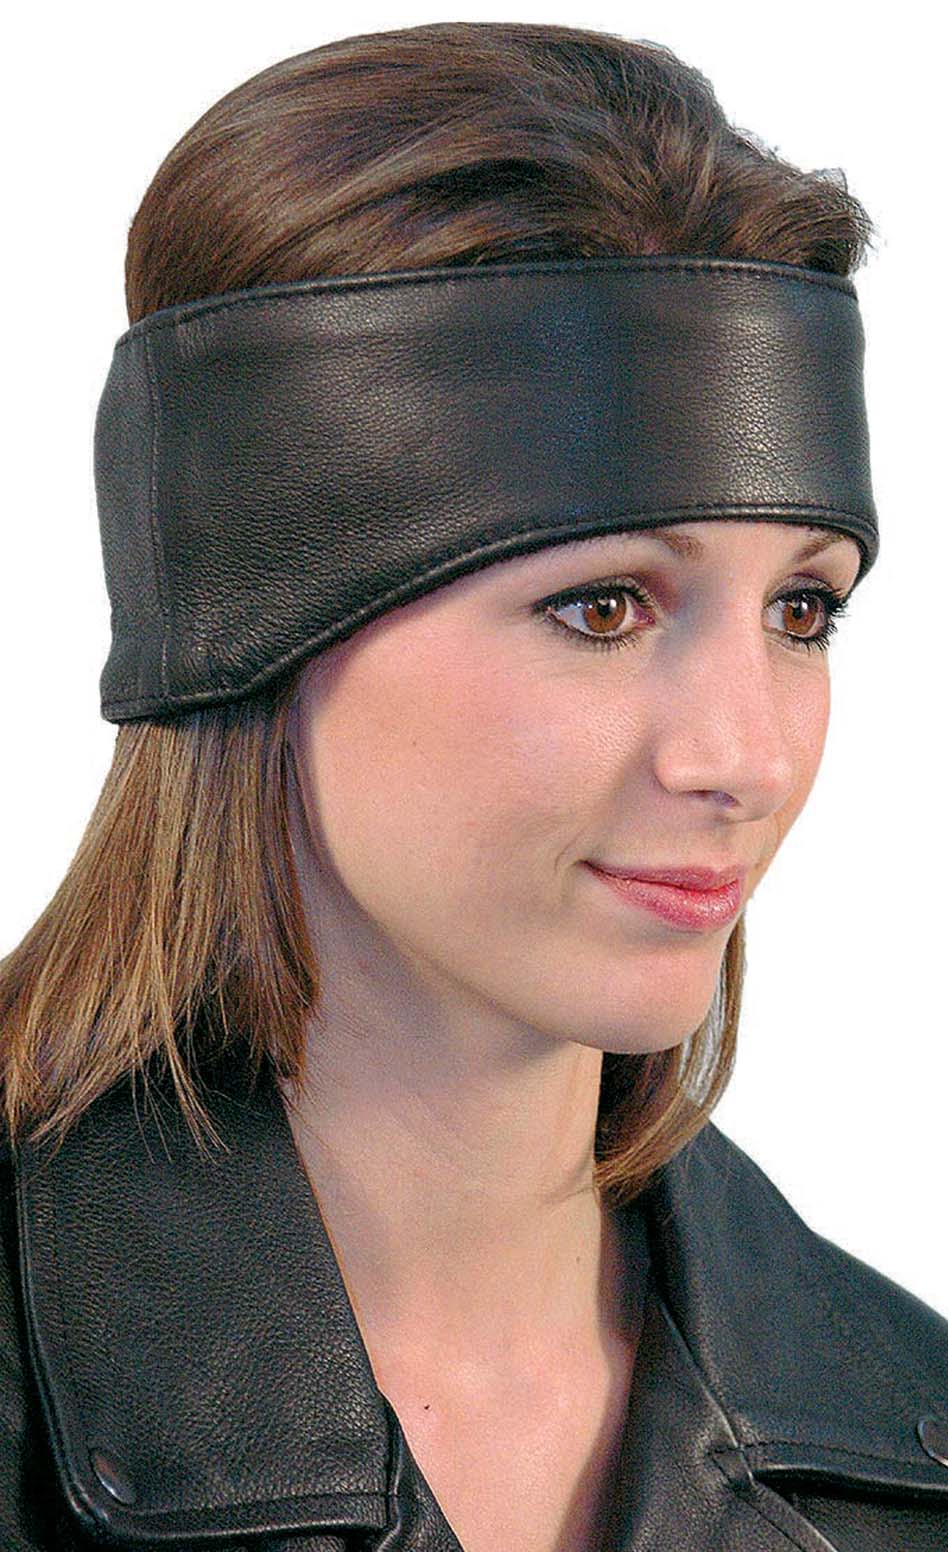 Fleece lined leather ear warmer and leather headband for both men and women.